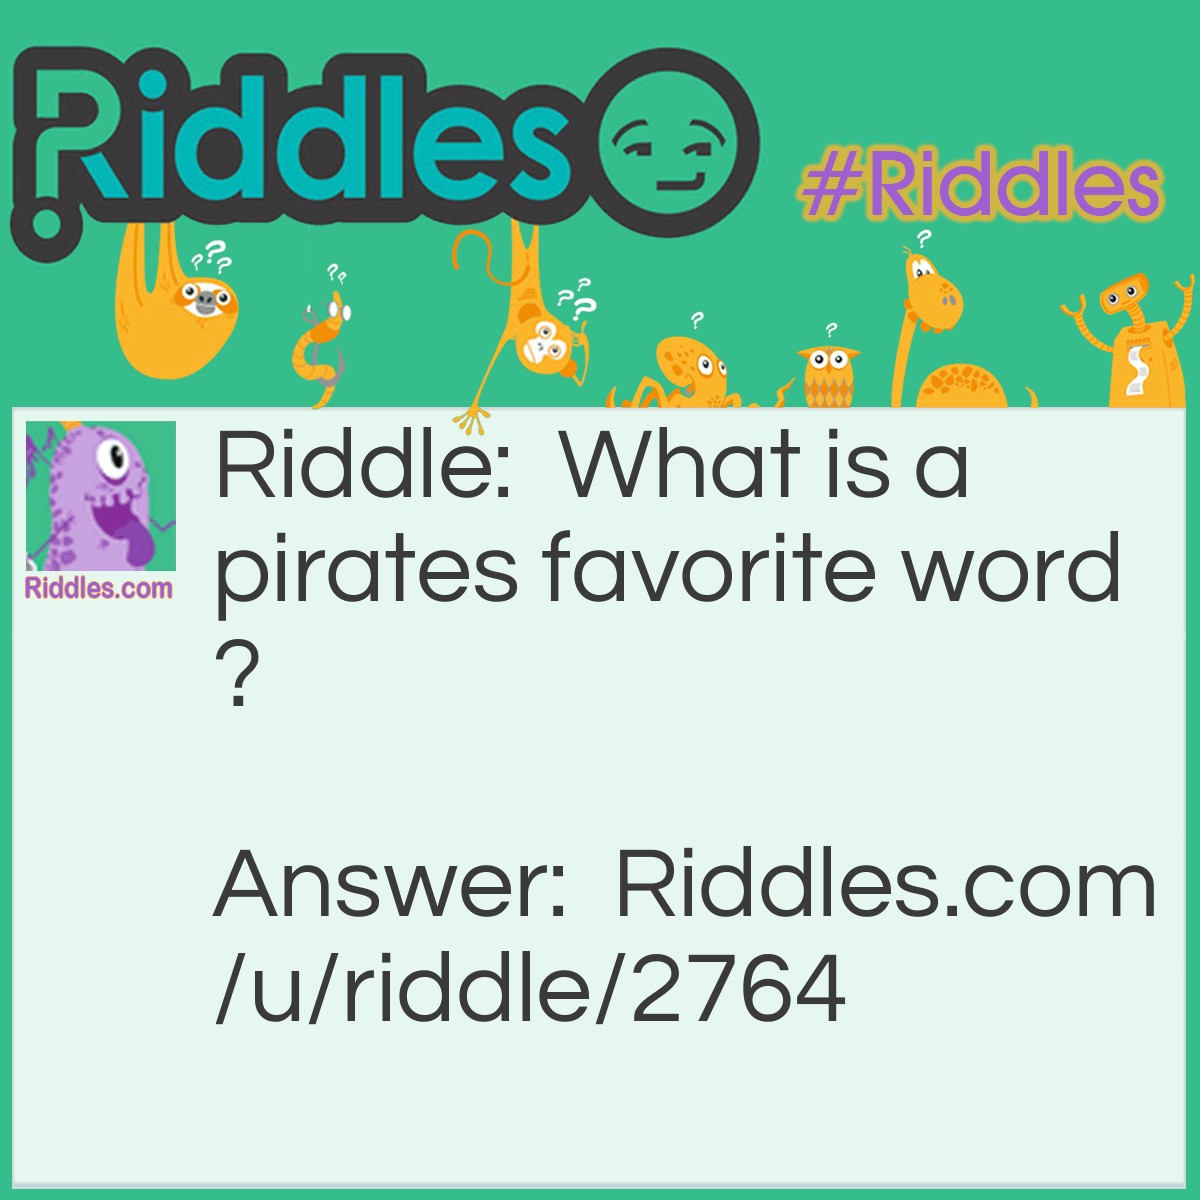 Riddle: What is a pirates favorite word? Answer: Arrgh.